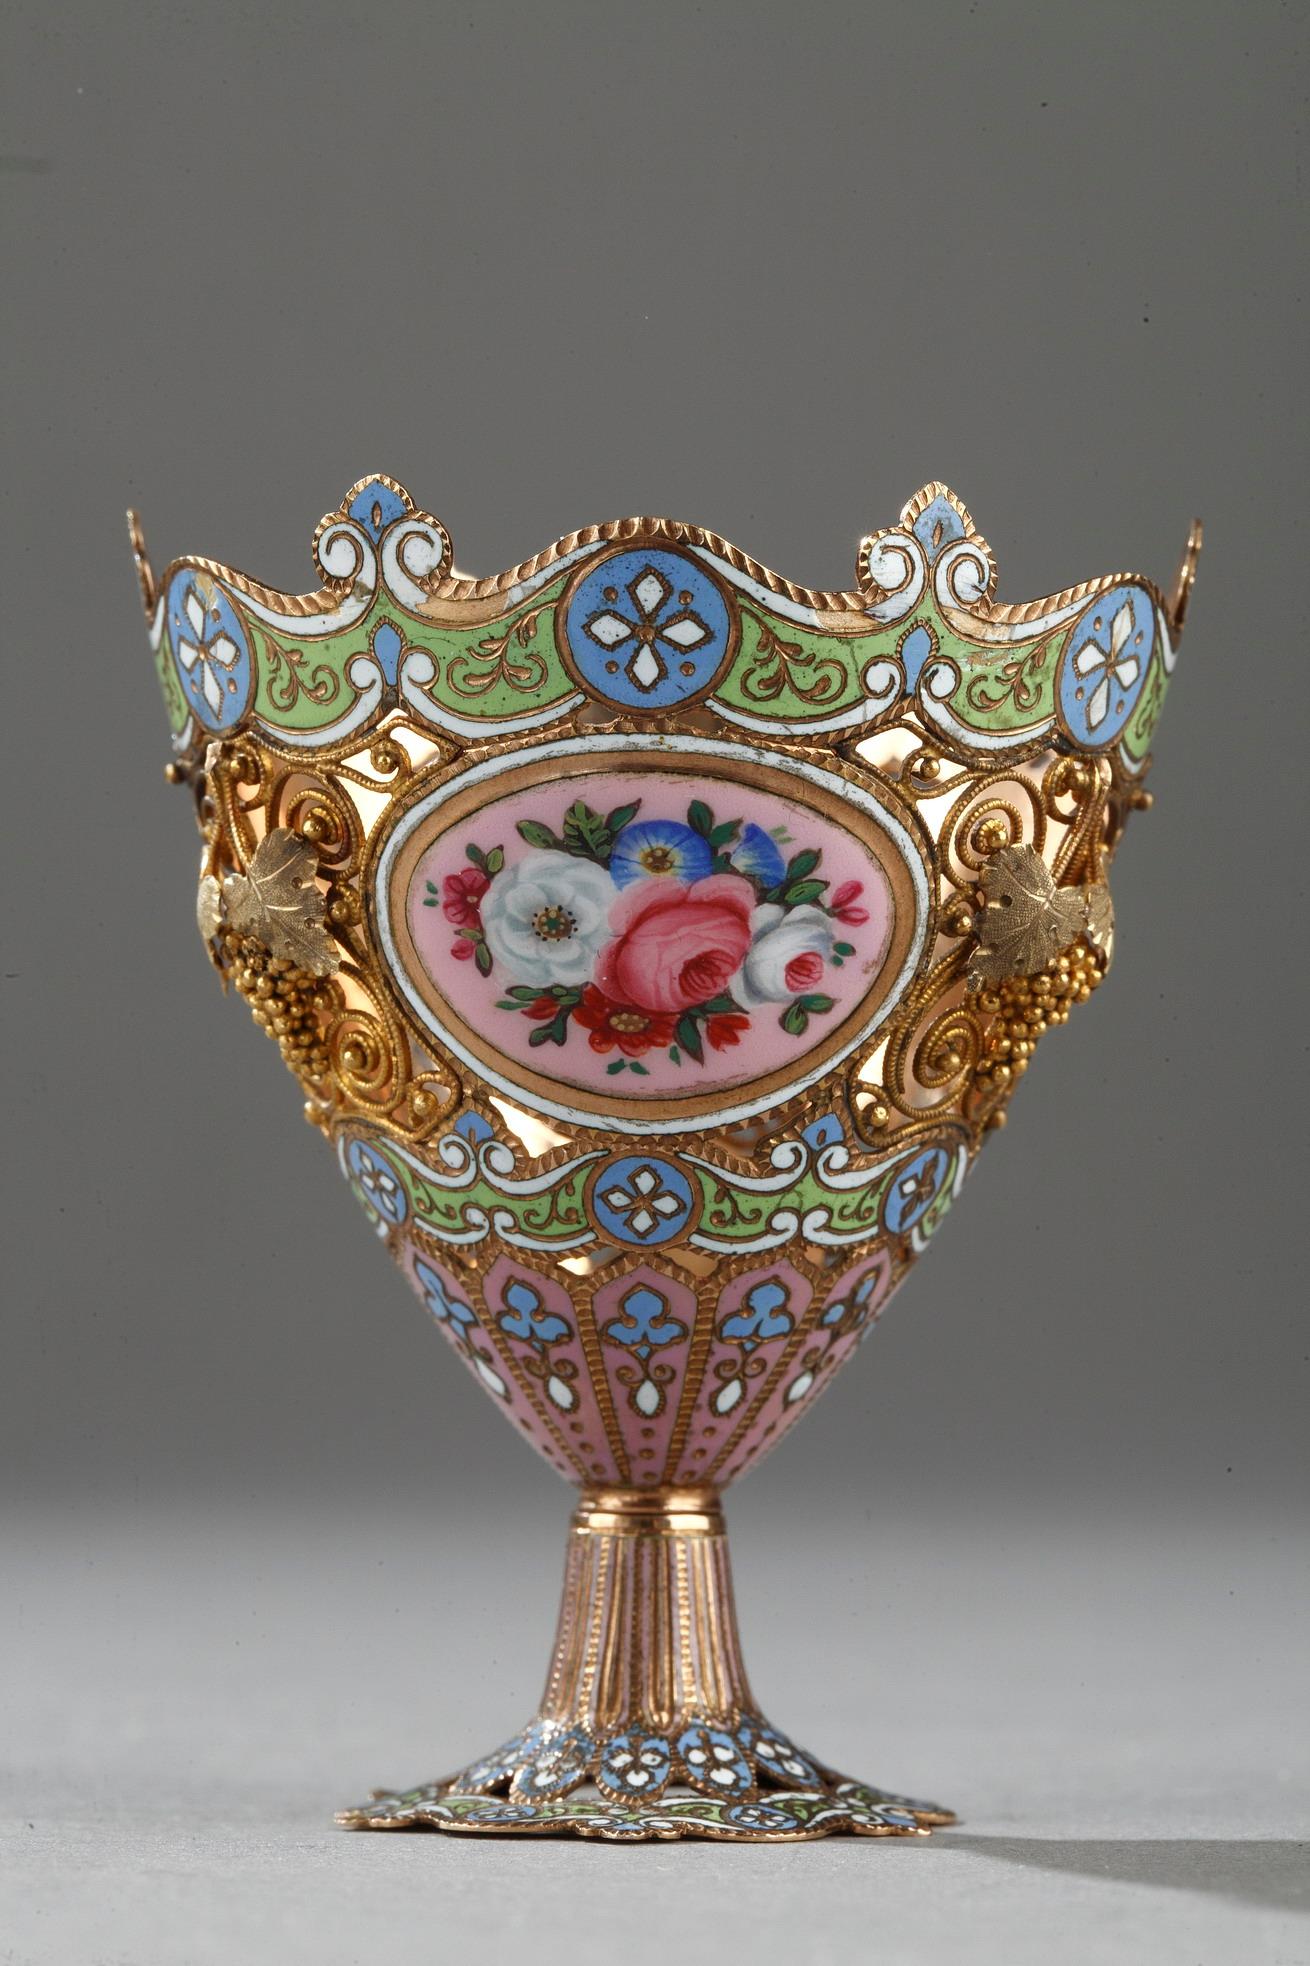 A gold and enamel Zarf. Swiss. Early 19th century.